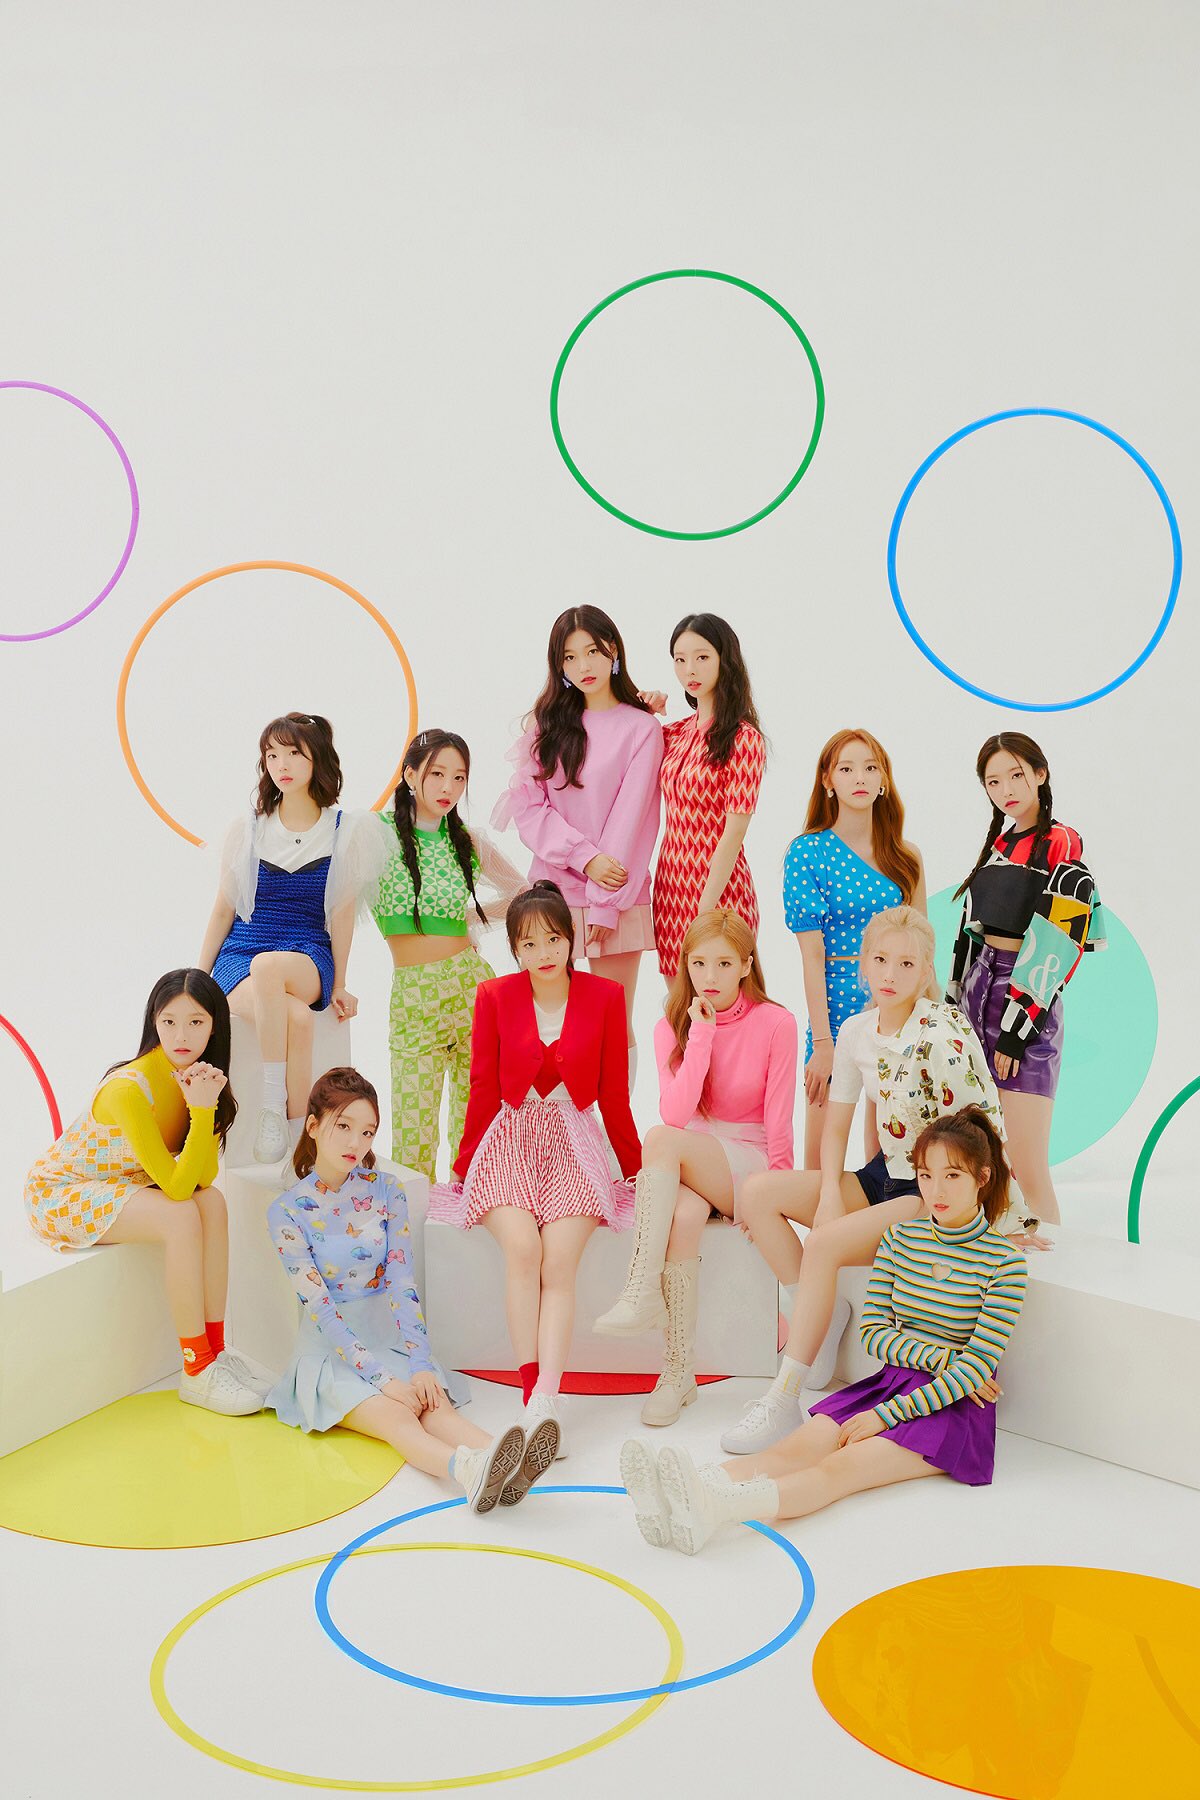 Loona Hula Hoop Starseed Group Concept Teaser Picture Image Photo Kpop K-Concept 1